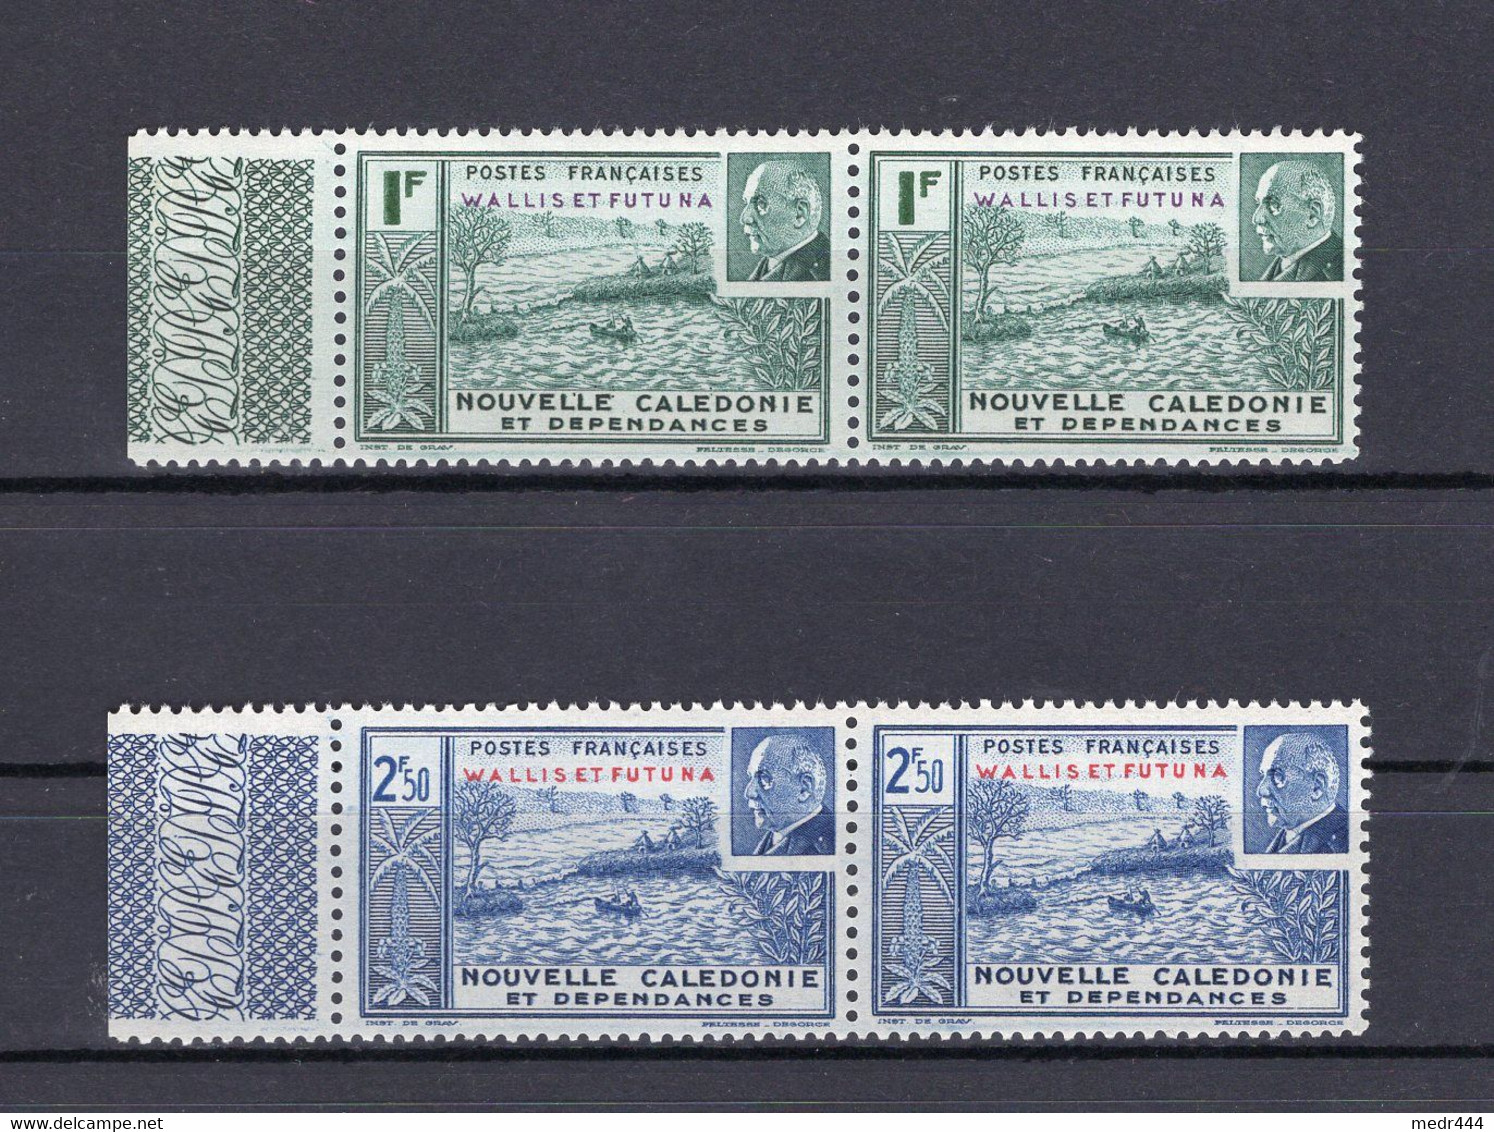 Wallis And Futuna 1941- Marechal Petain - Oceania, New Caledonia, Wallis And Futuna - Pair Of Stamps - MNH** - Superb*** - Covers & Documents